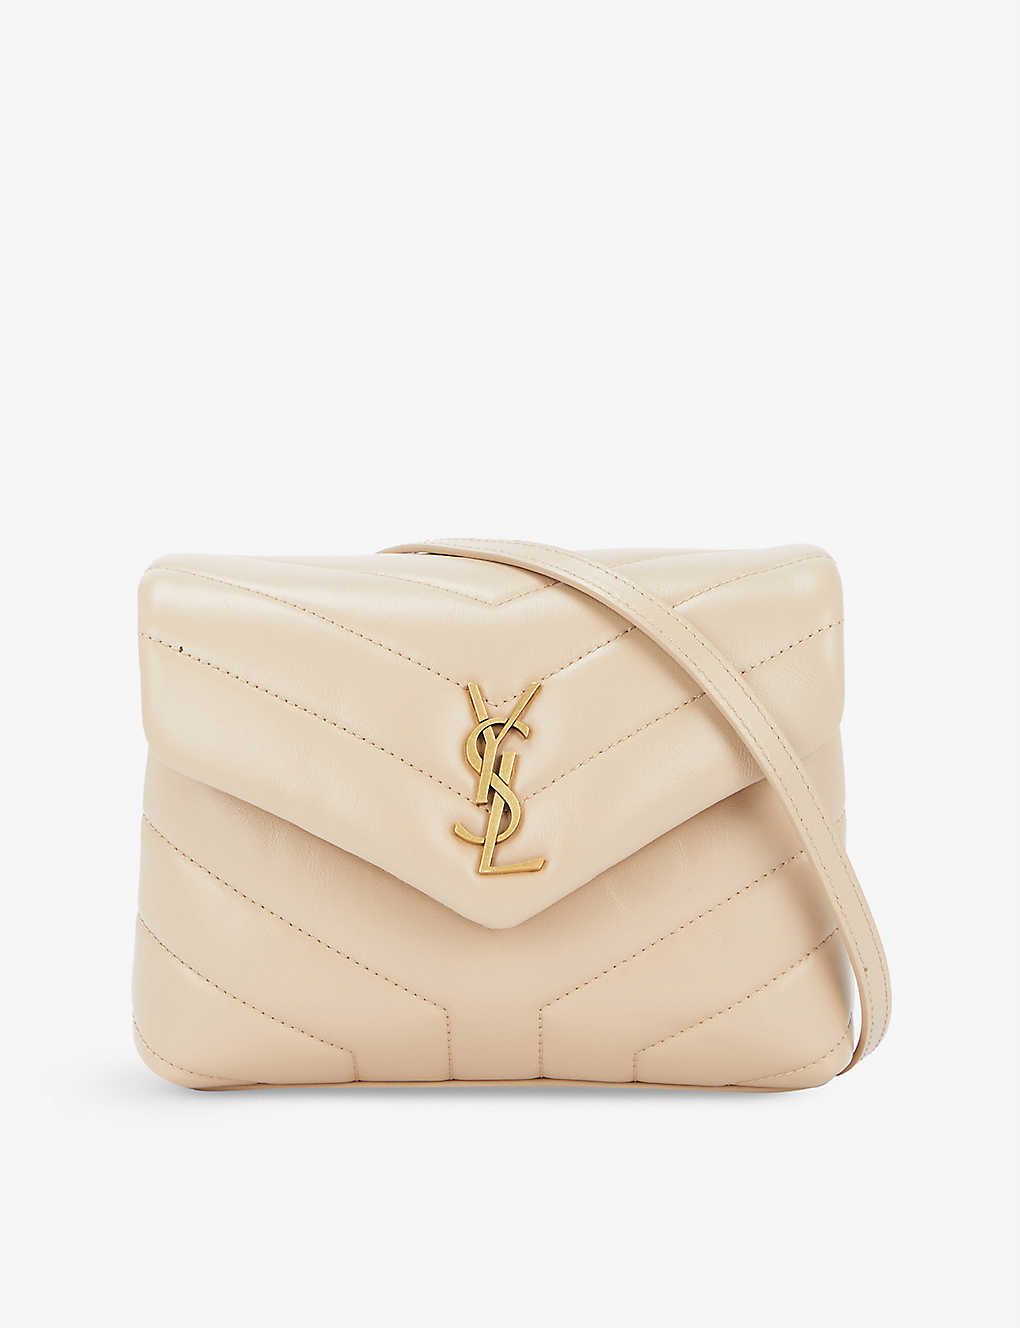 Loulou Toy leather cross-body bag | Selfridges